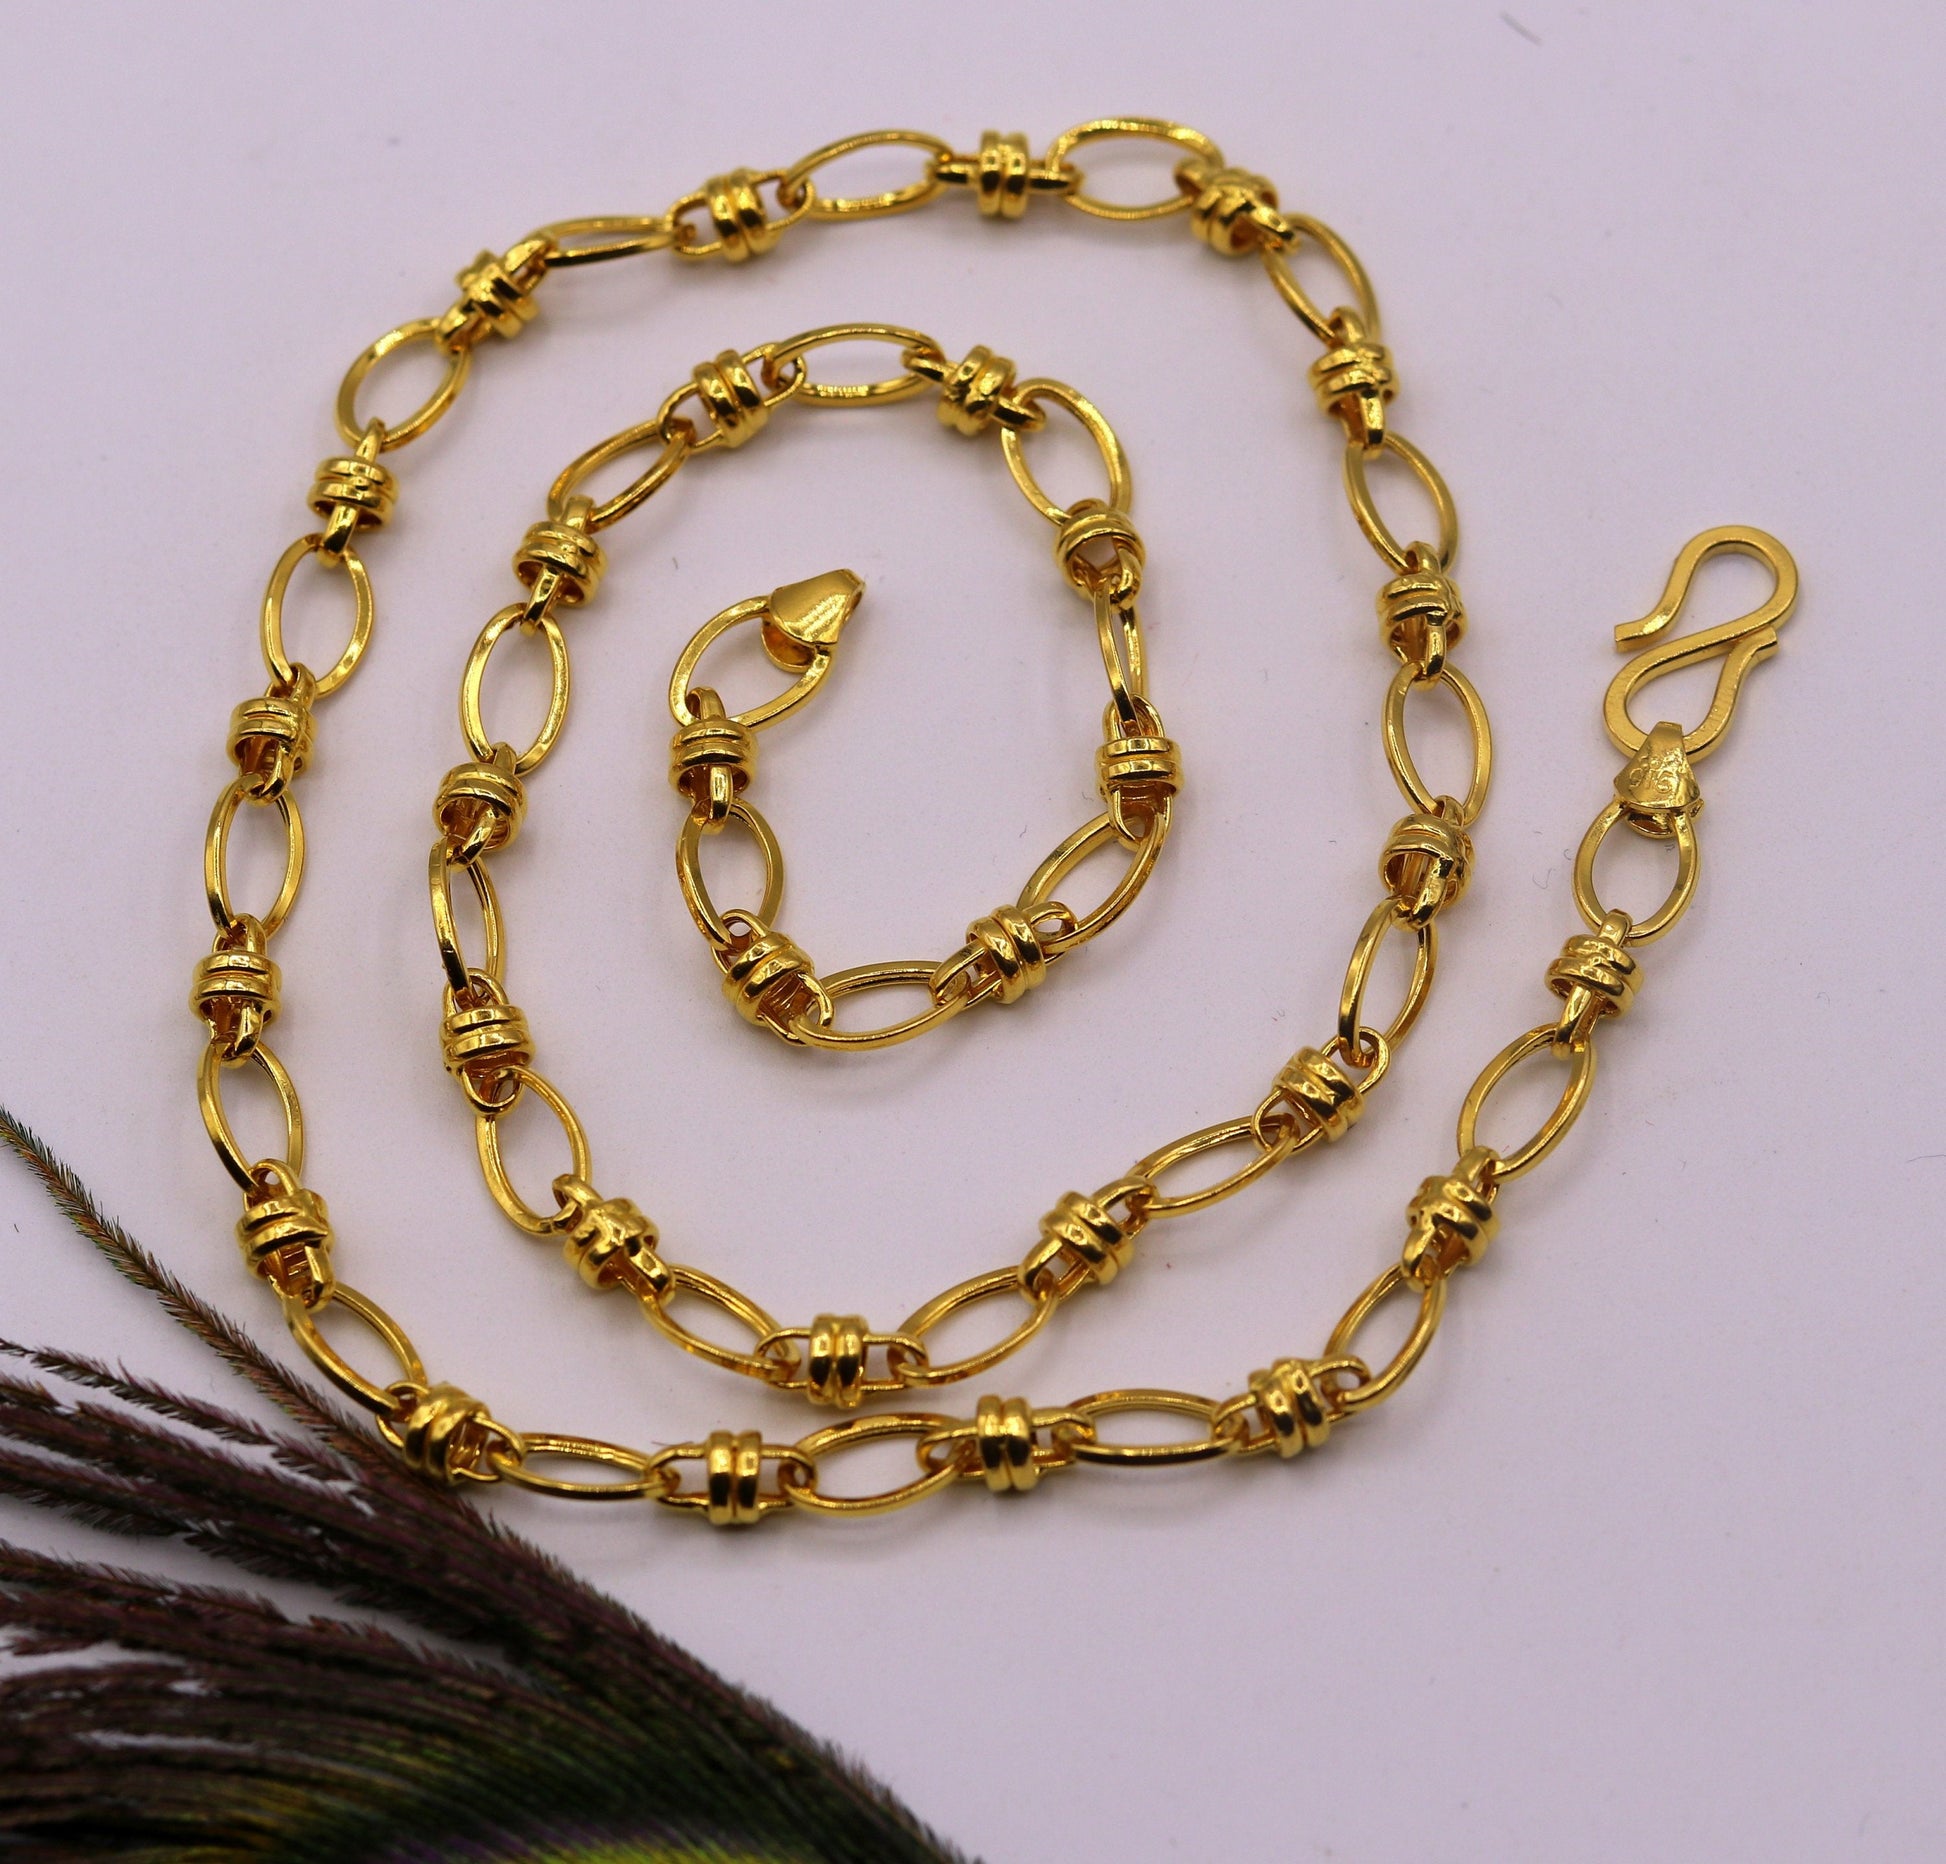 Handmade 22kt ct yellow gold gorgeous design link chain indian tribal design necklace gifting jewelry ch189 - TRIBAL ORNAMENTS